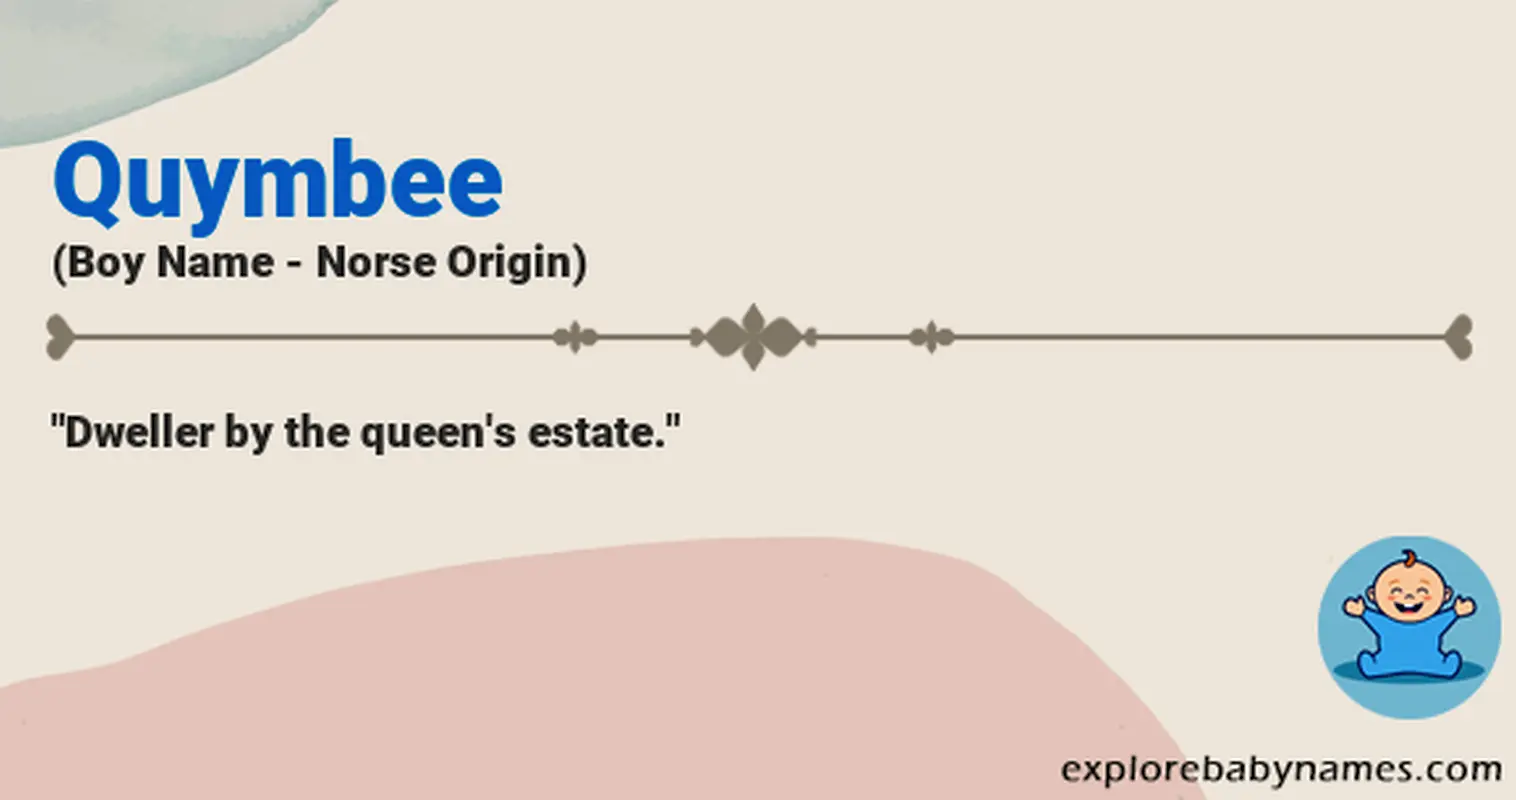 Meaning of Quymbee